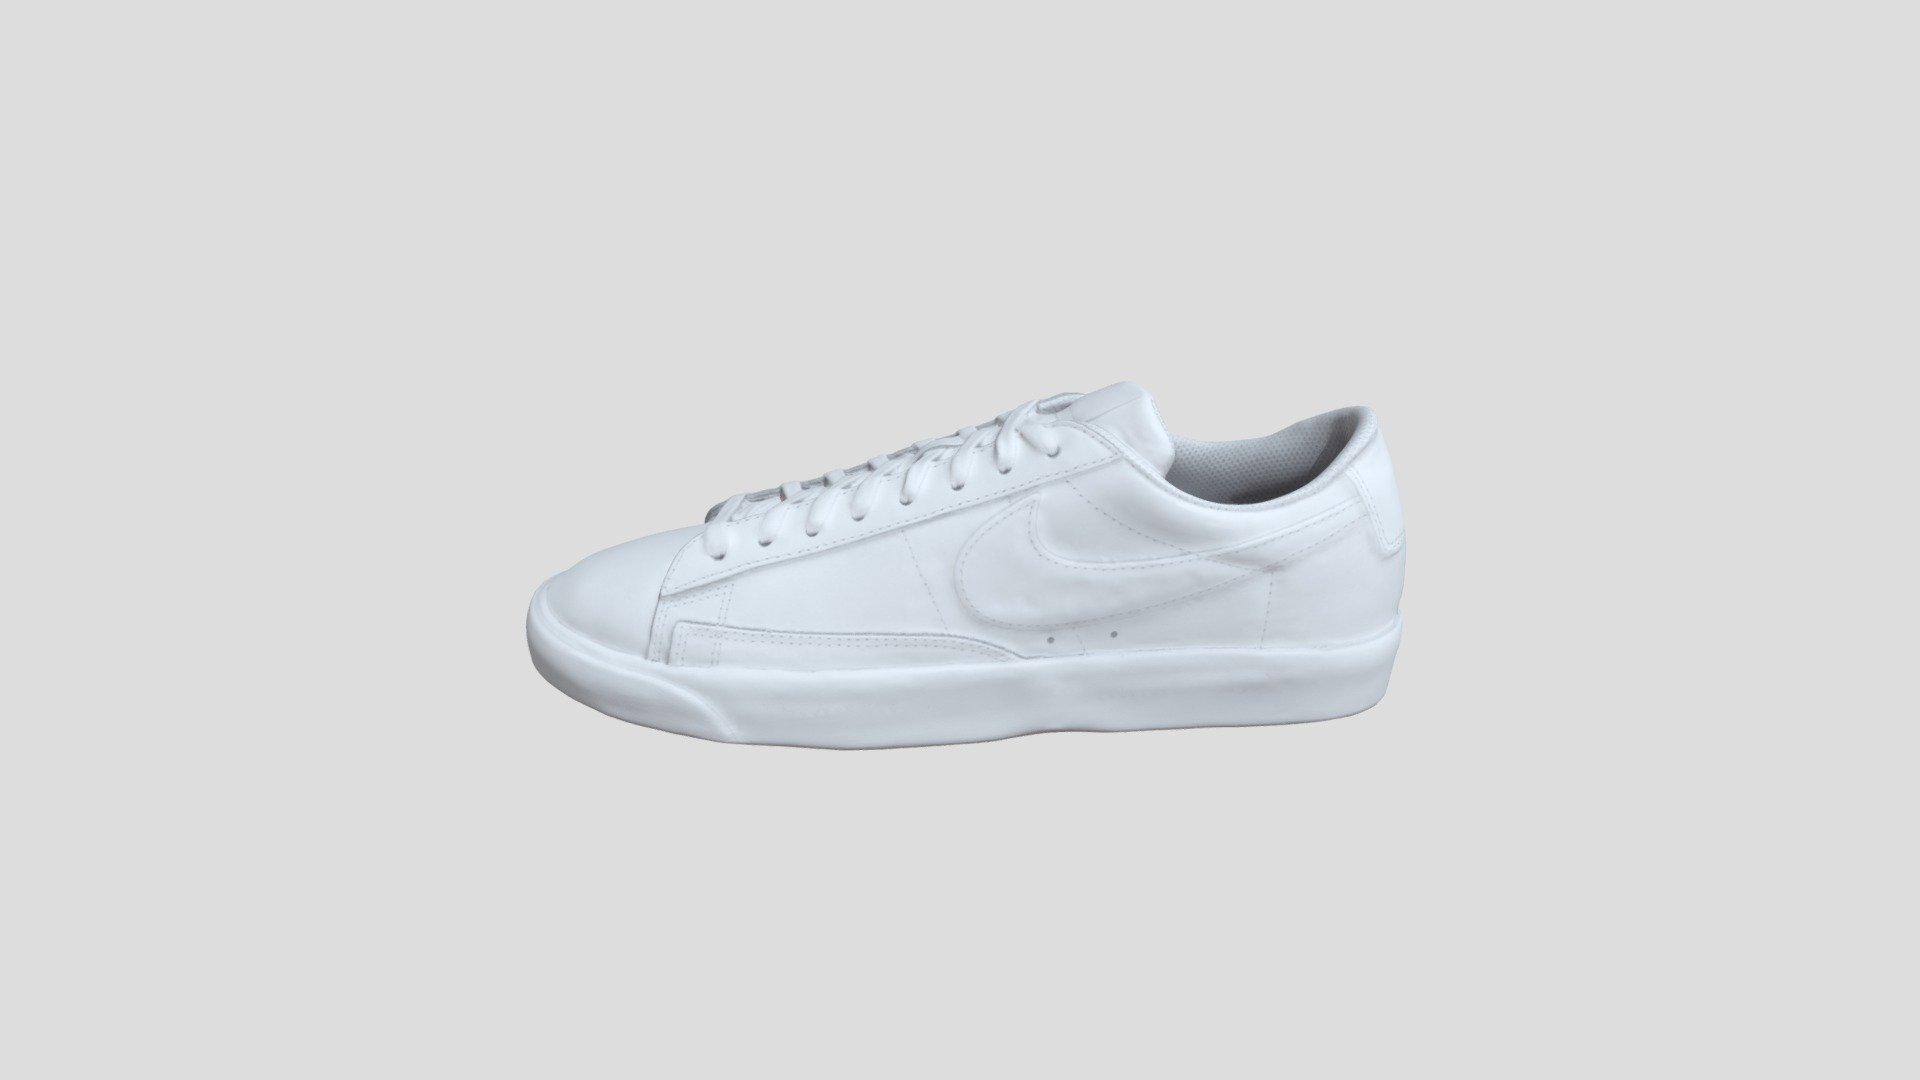 This model was created firstly by 3D scanning on retail version, and then being detail-improved manually, thus a 1:1 repulica of the original
PBR ready
Low-poly
4K texture
Welcome to check out other models we have to offer. And we do accept custom orders as well :) - Nike Blazer Low Lthr 白色_AQ3597-100 - Buy Royalty Free 3D model by TRARGUS 3d model